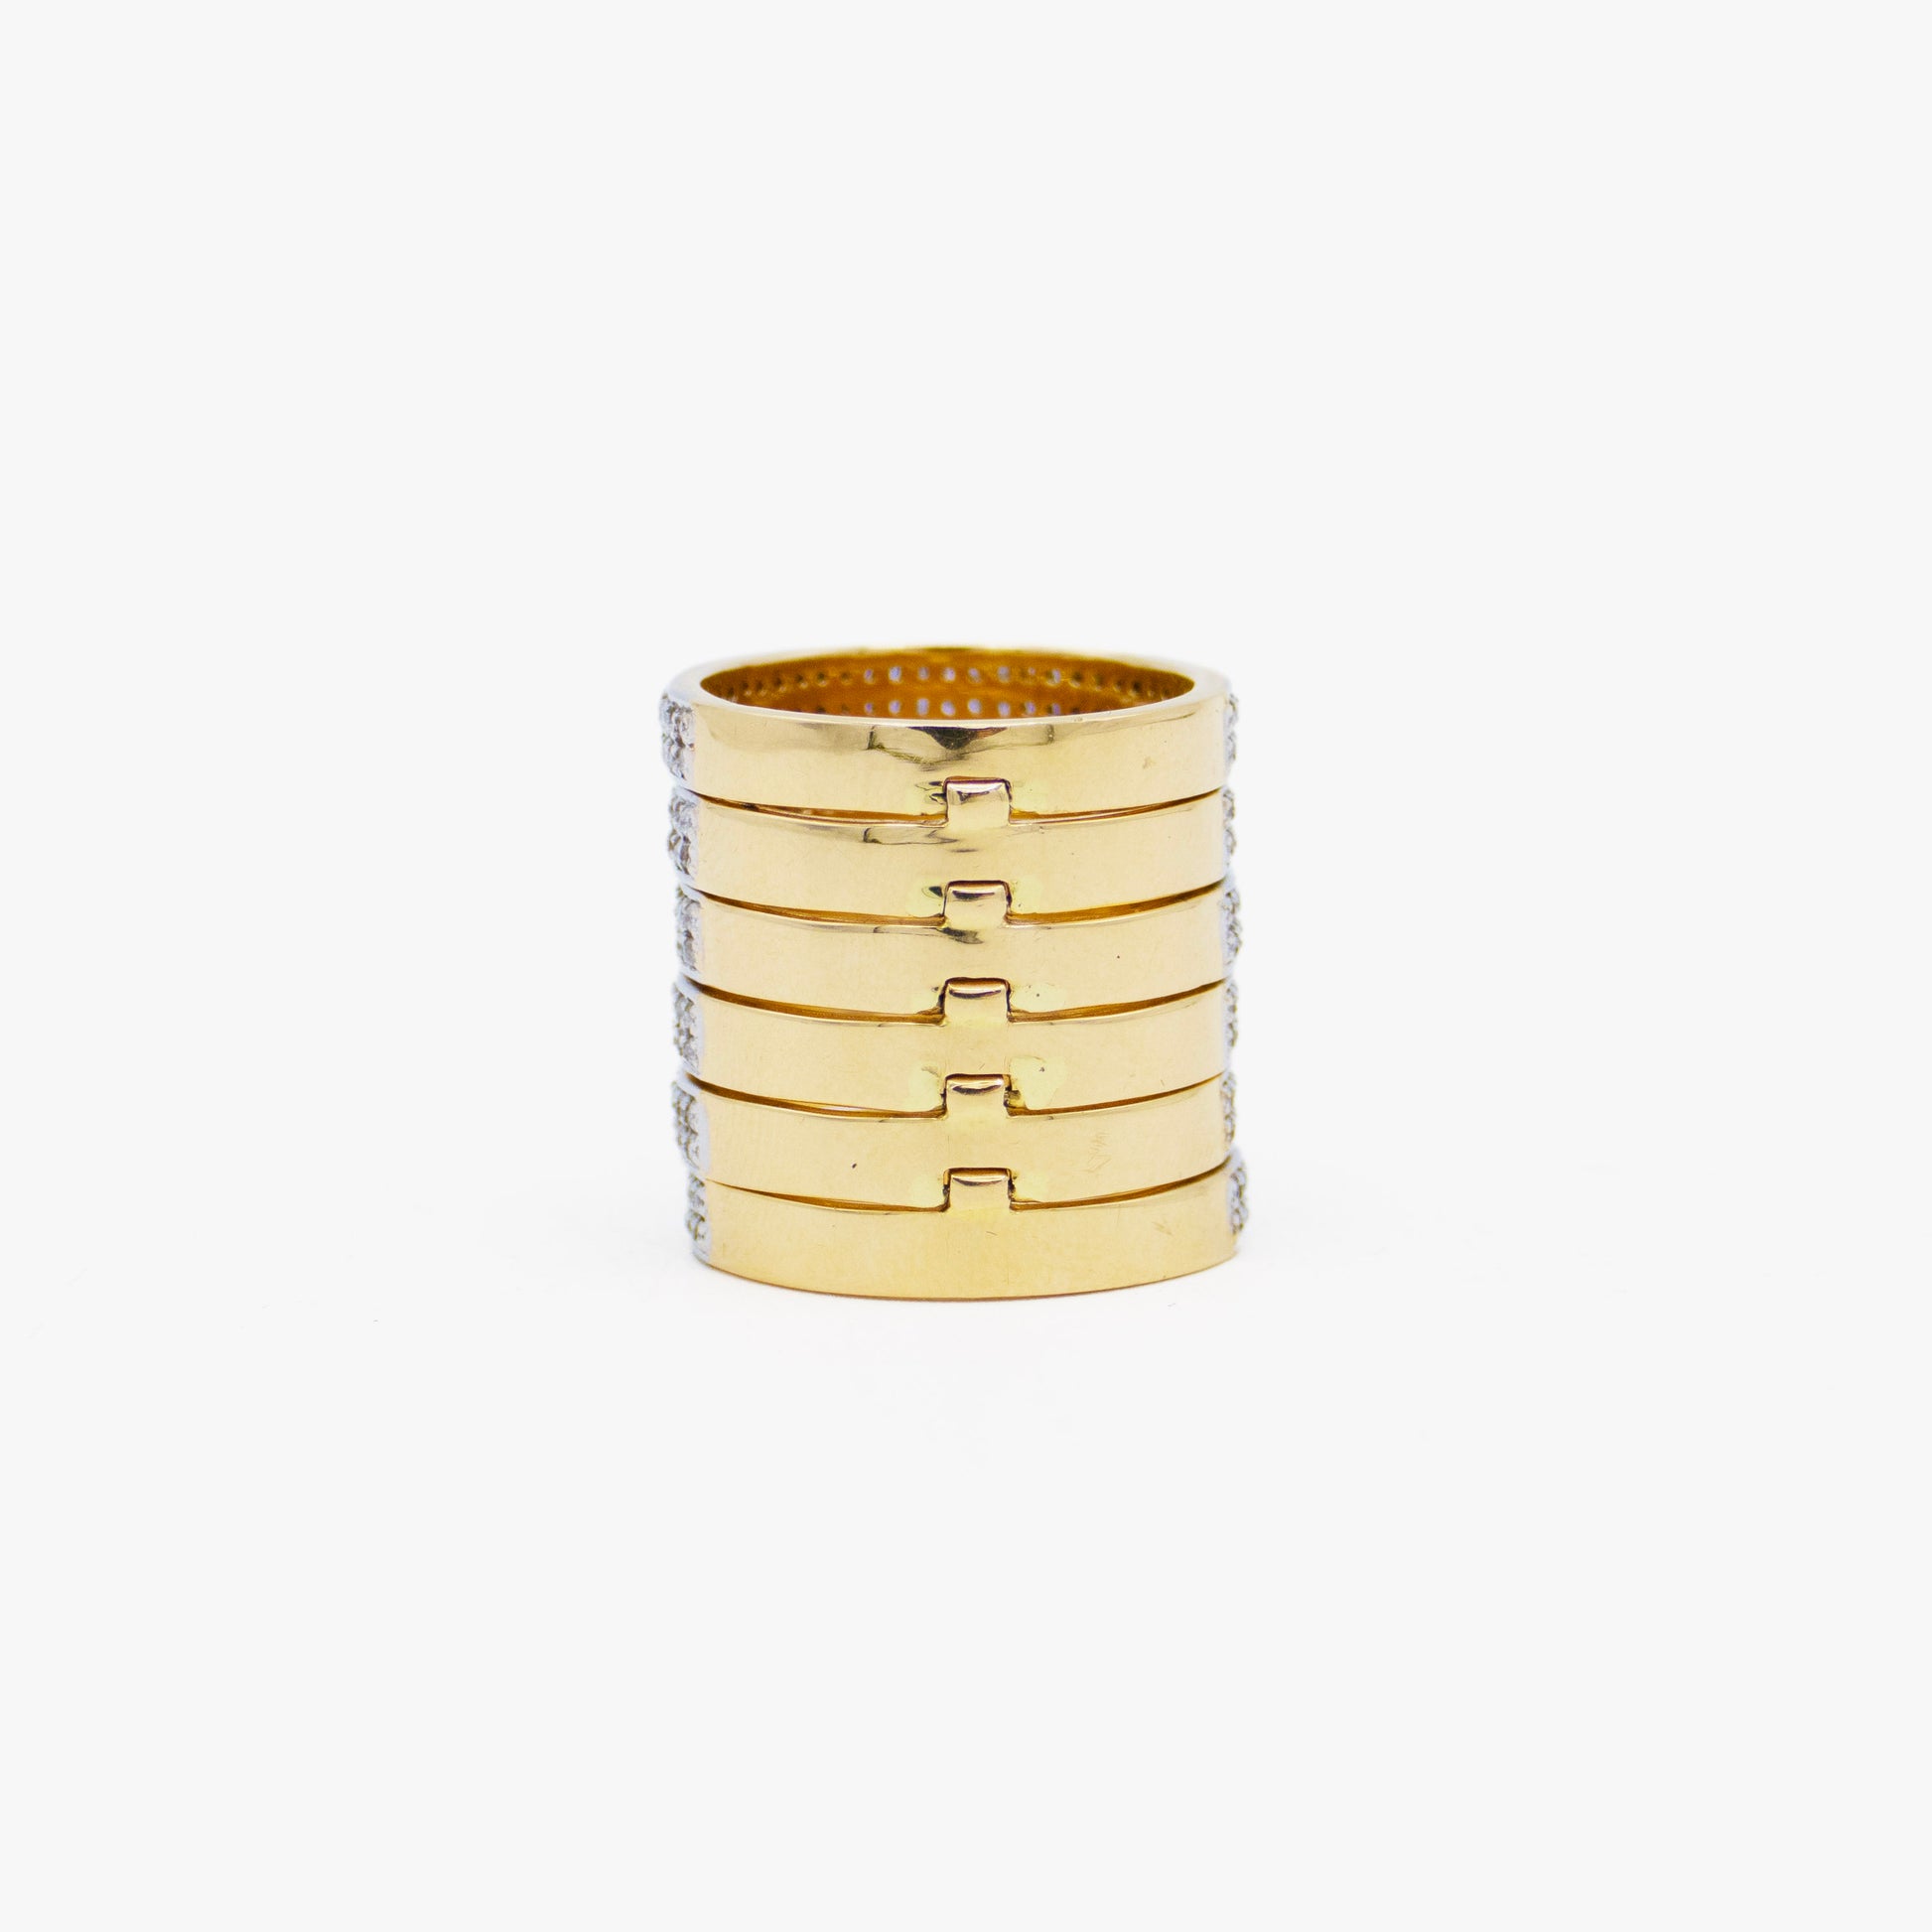 AM Studio 18KT Gold and Diamond Stacked Ring